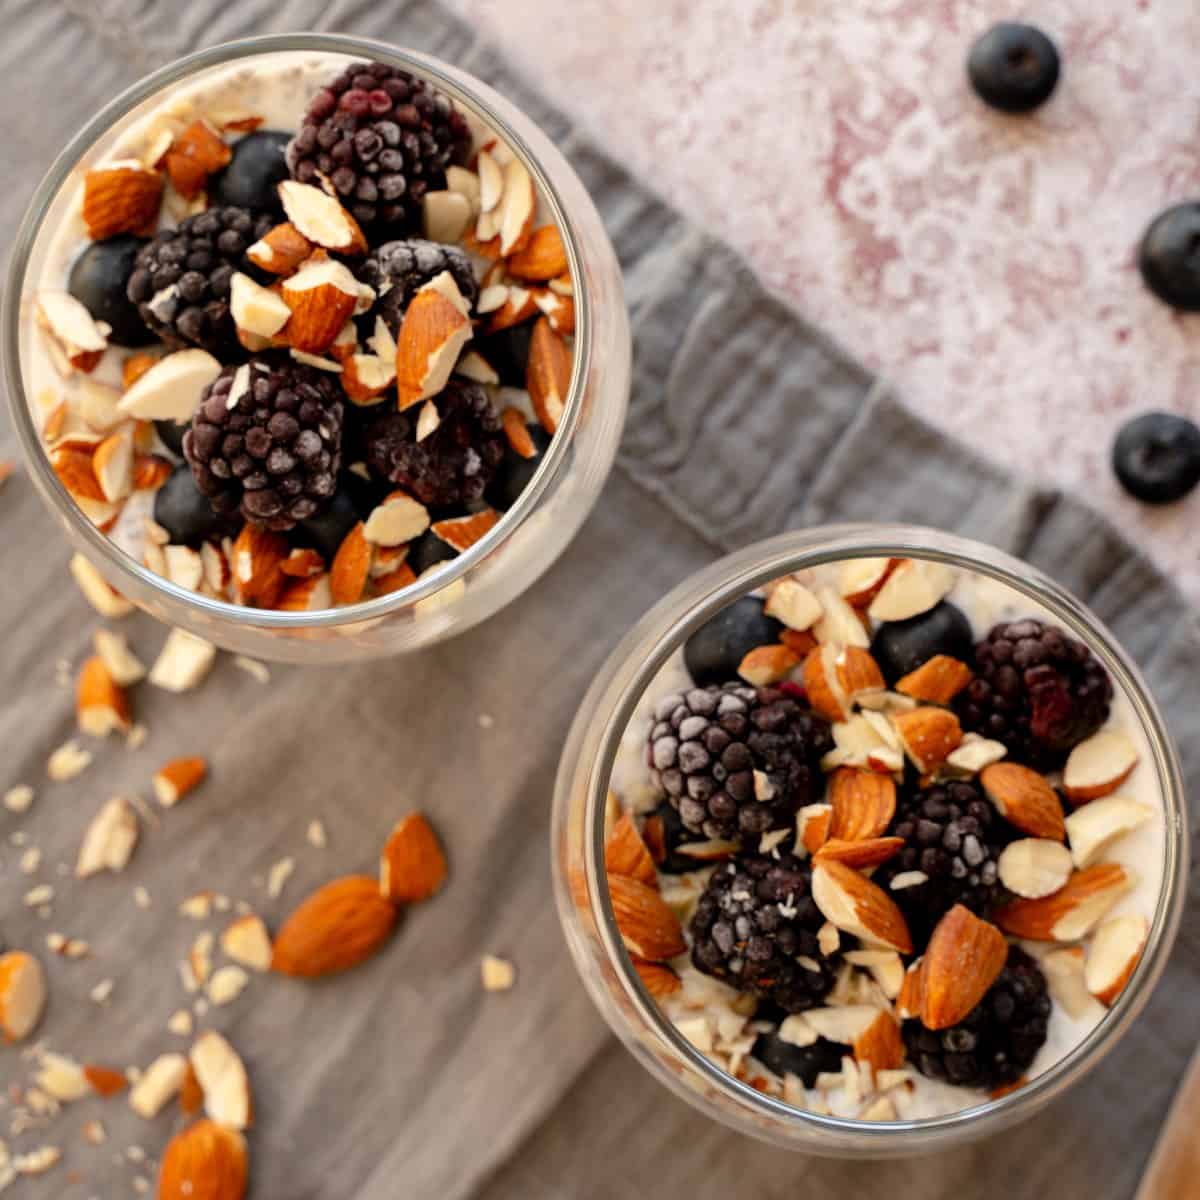 Overnight oats topped with nuts and berries served in glass jars.